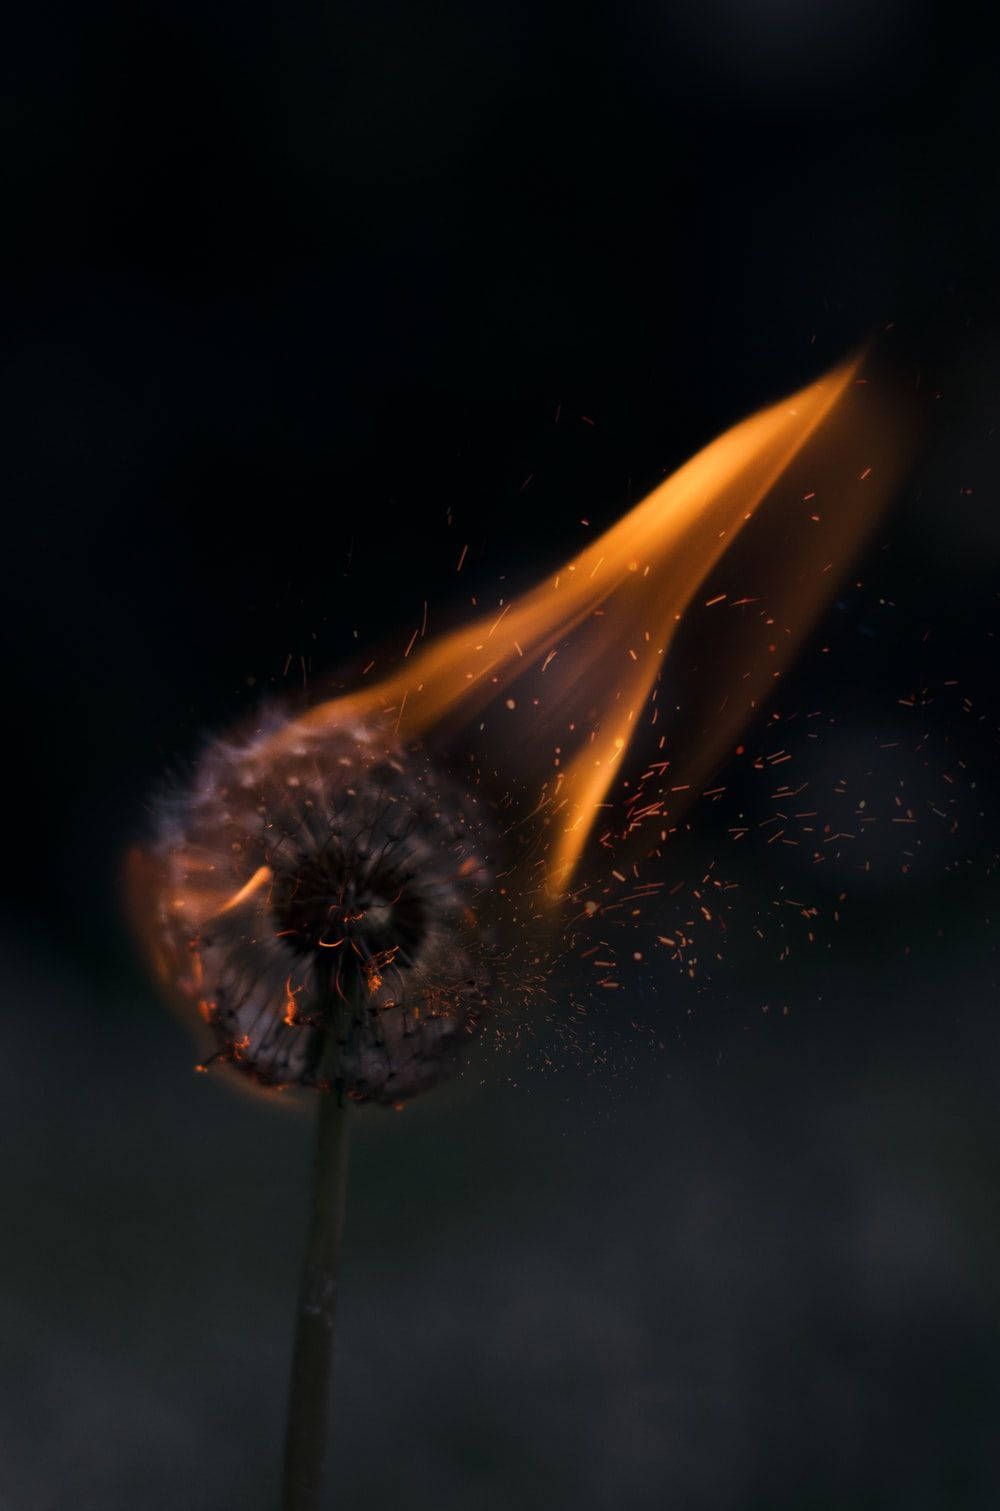 A dandelion is on fire, and the seeds are being blown away. - Photography